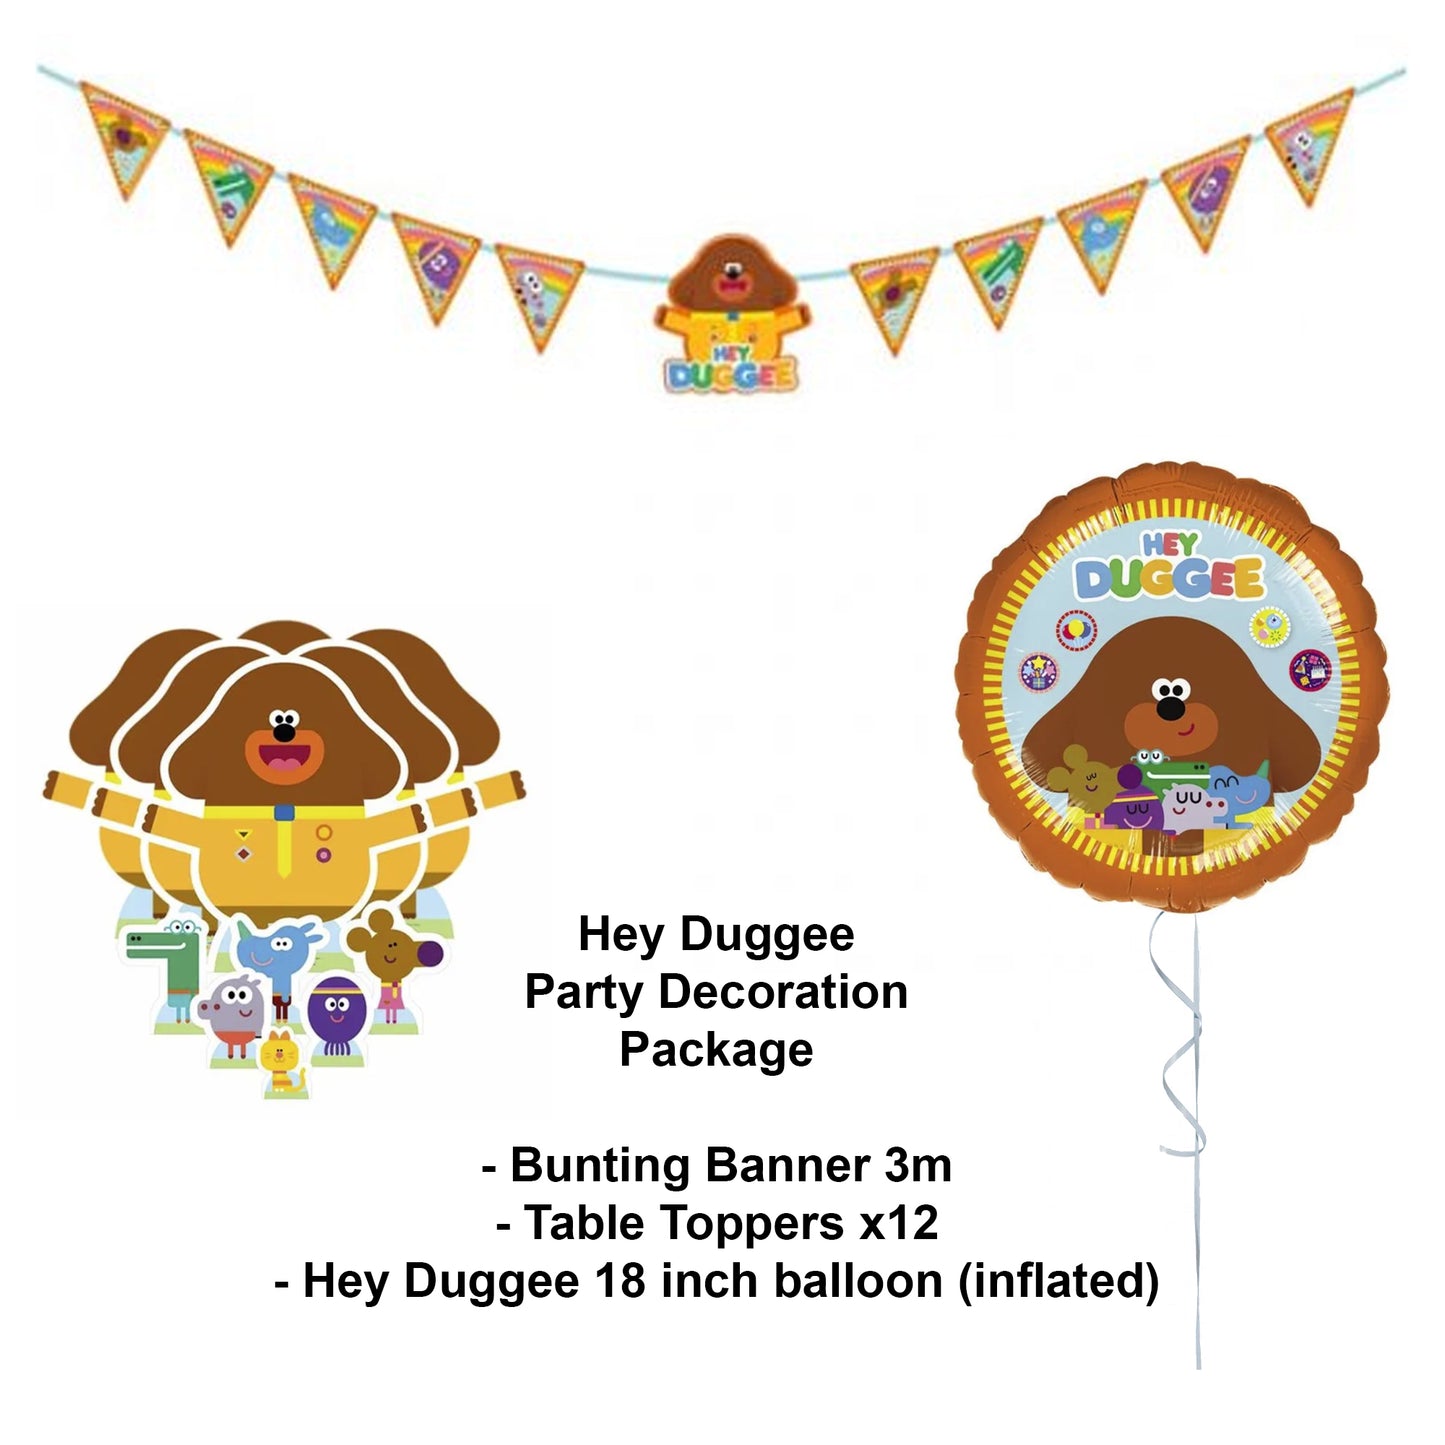 Hey Duggee Party Decoration Kit - Colorful bunting banner, table toppers with cute card figures, and inflated Hey Duggee balloon.